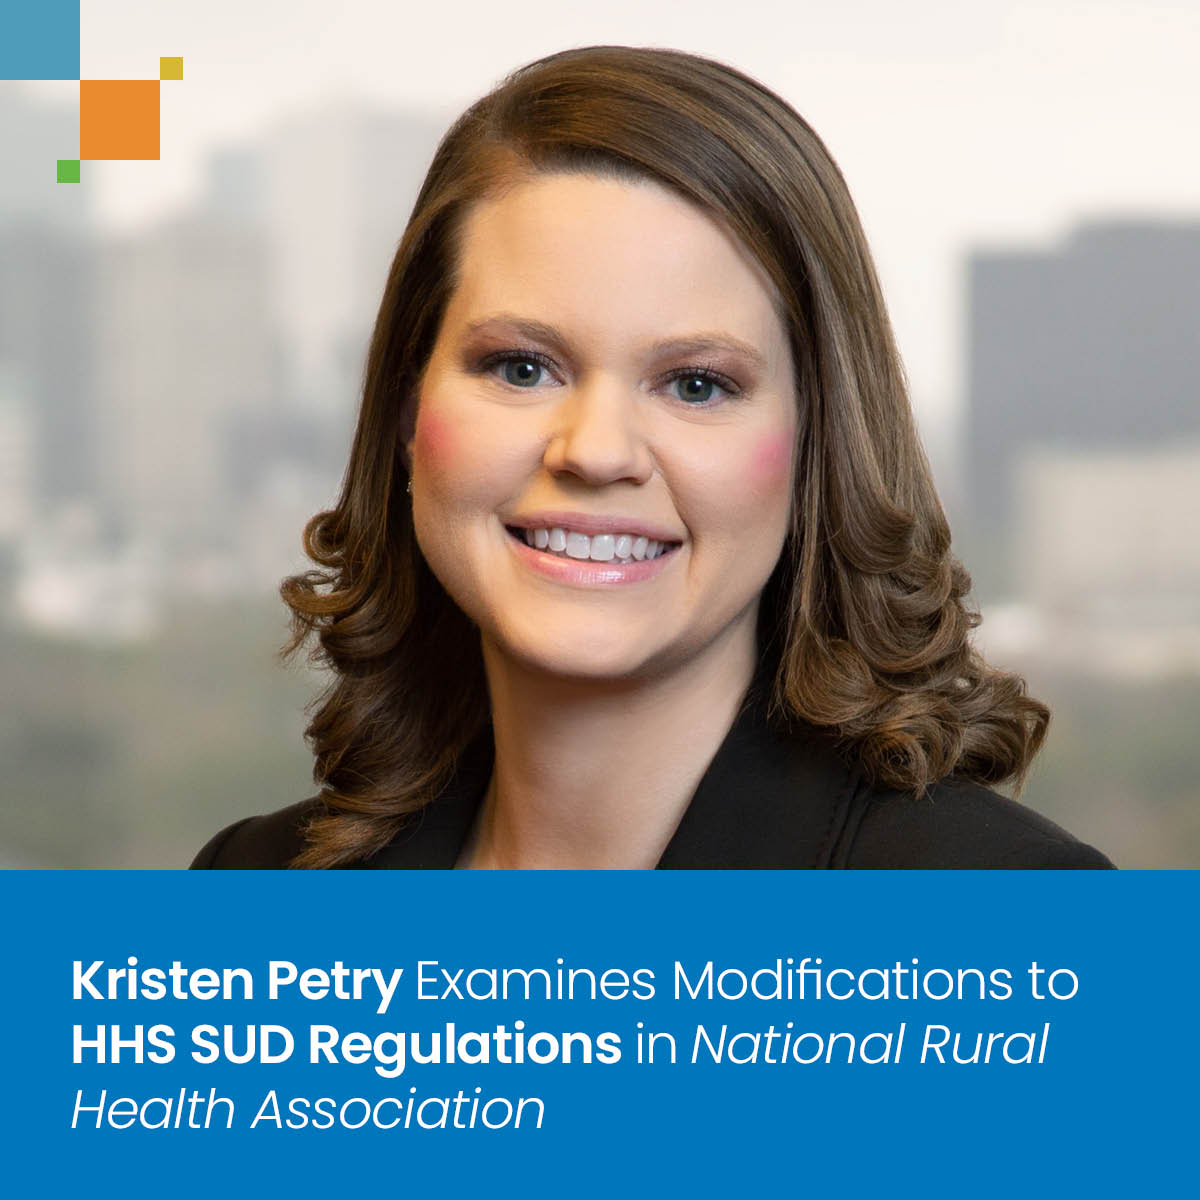 Kristen Petry Analyzes Changes to HHS Substance Use Disorder Regulations in National Rural Health Association